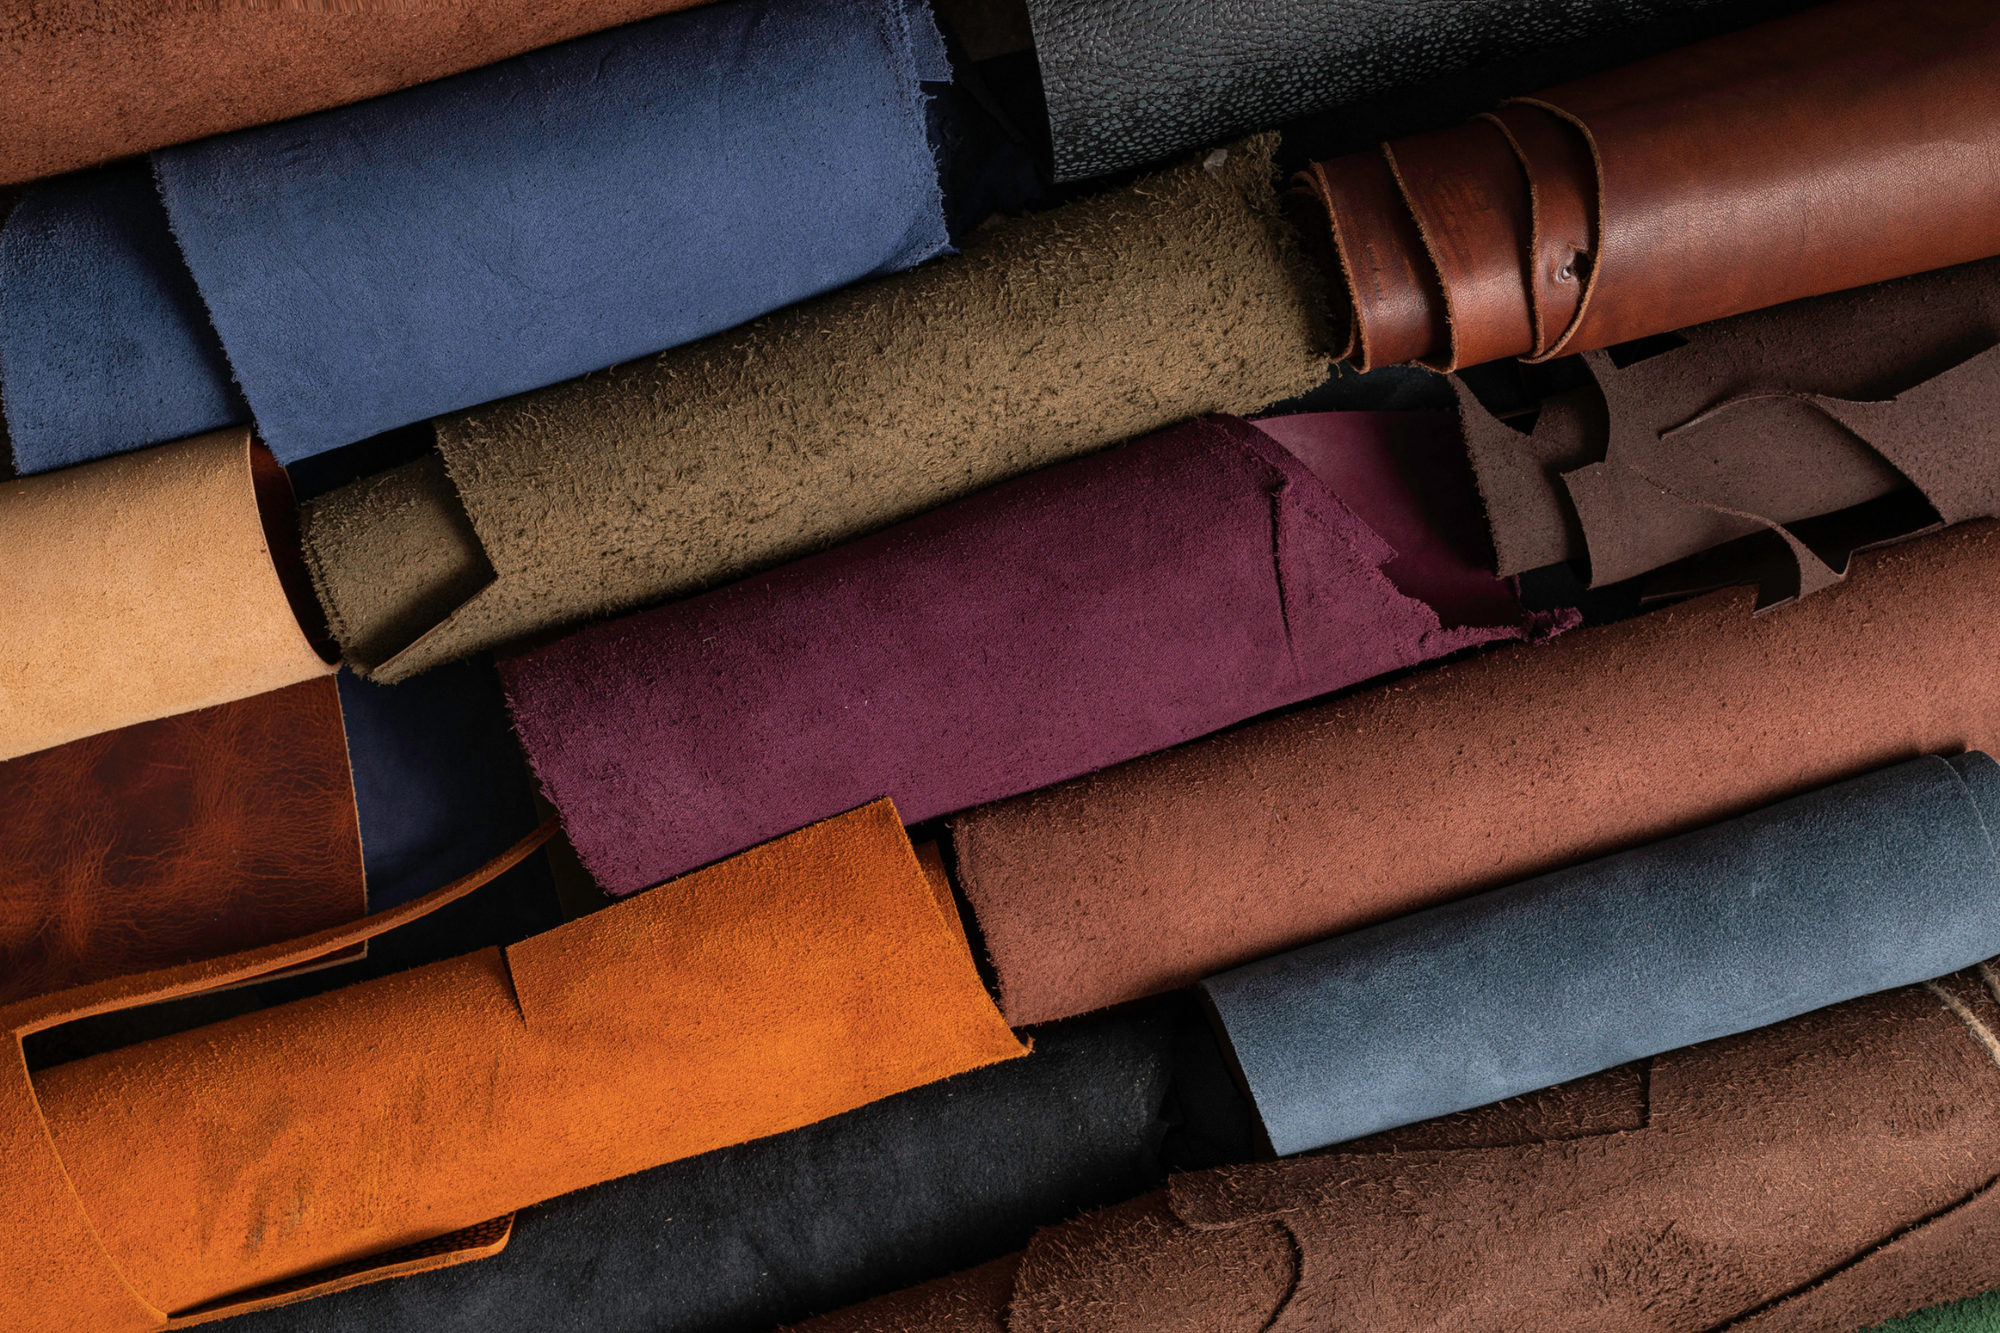 The Different Types of Leather and Their Characteristics